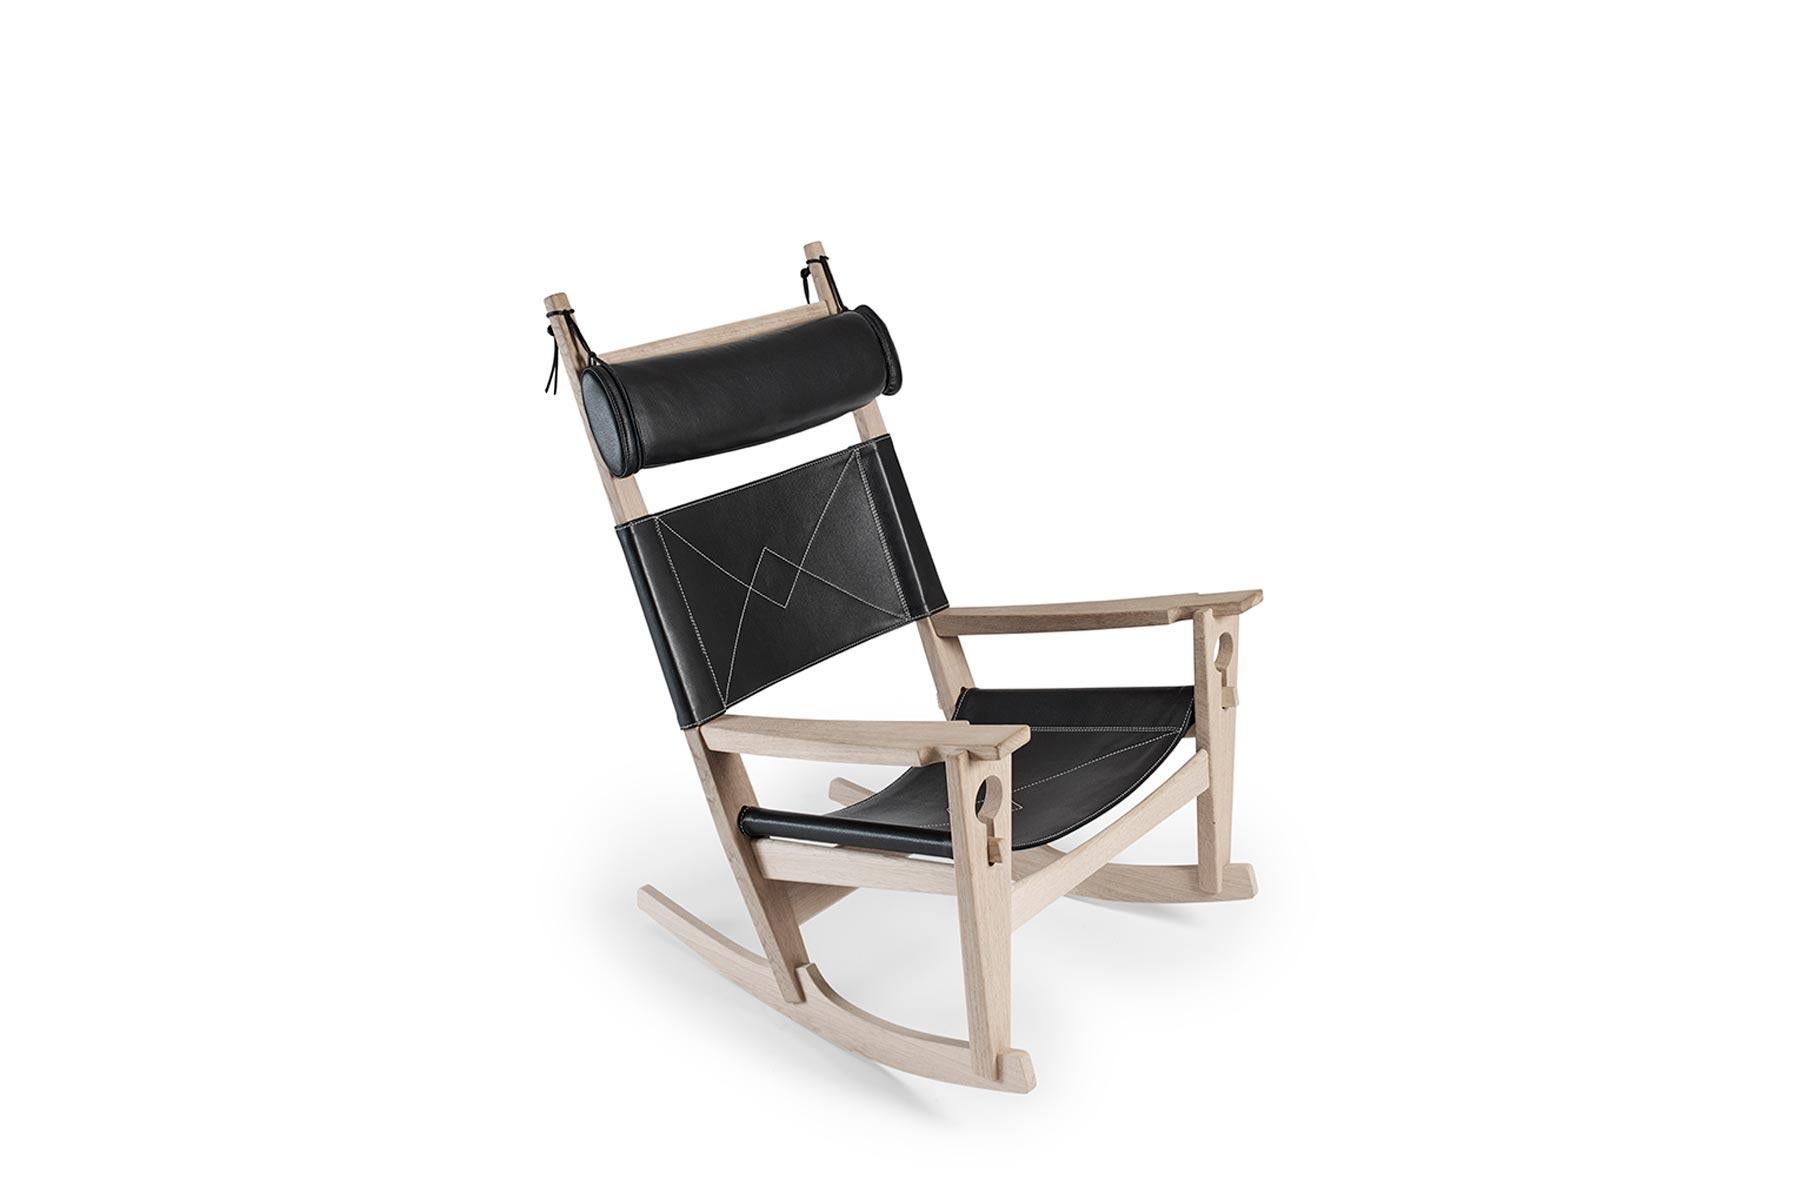 Designed in 1967 by Hans Wegner, the 673 “Keyhole” rocking chair showcases the chair’s construction as well as the designer’s creativity toward form and function. The chair is hand built at GETAMA’s factory in Gedsted, Denmark by skilled